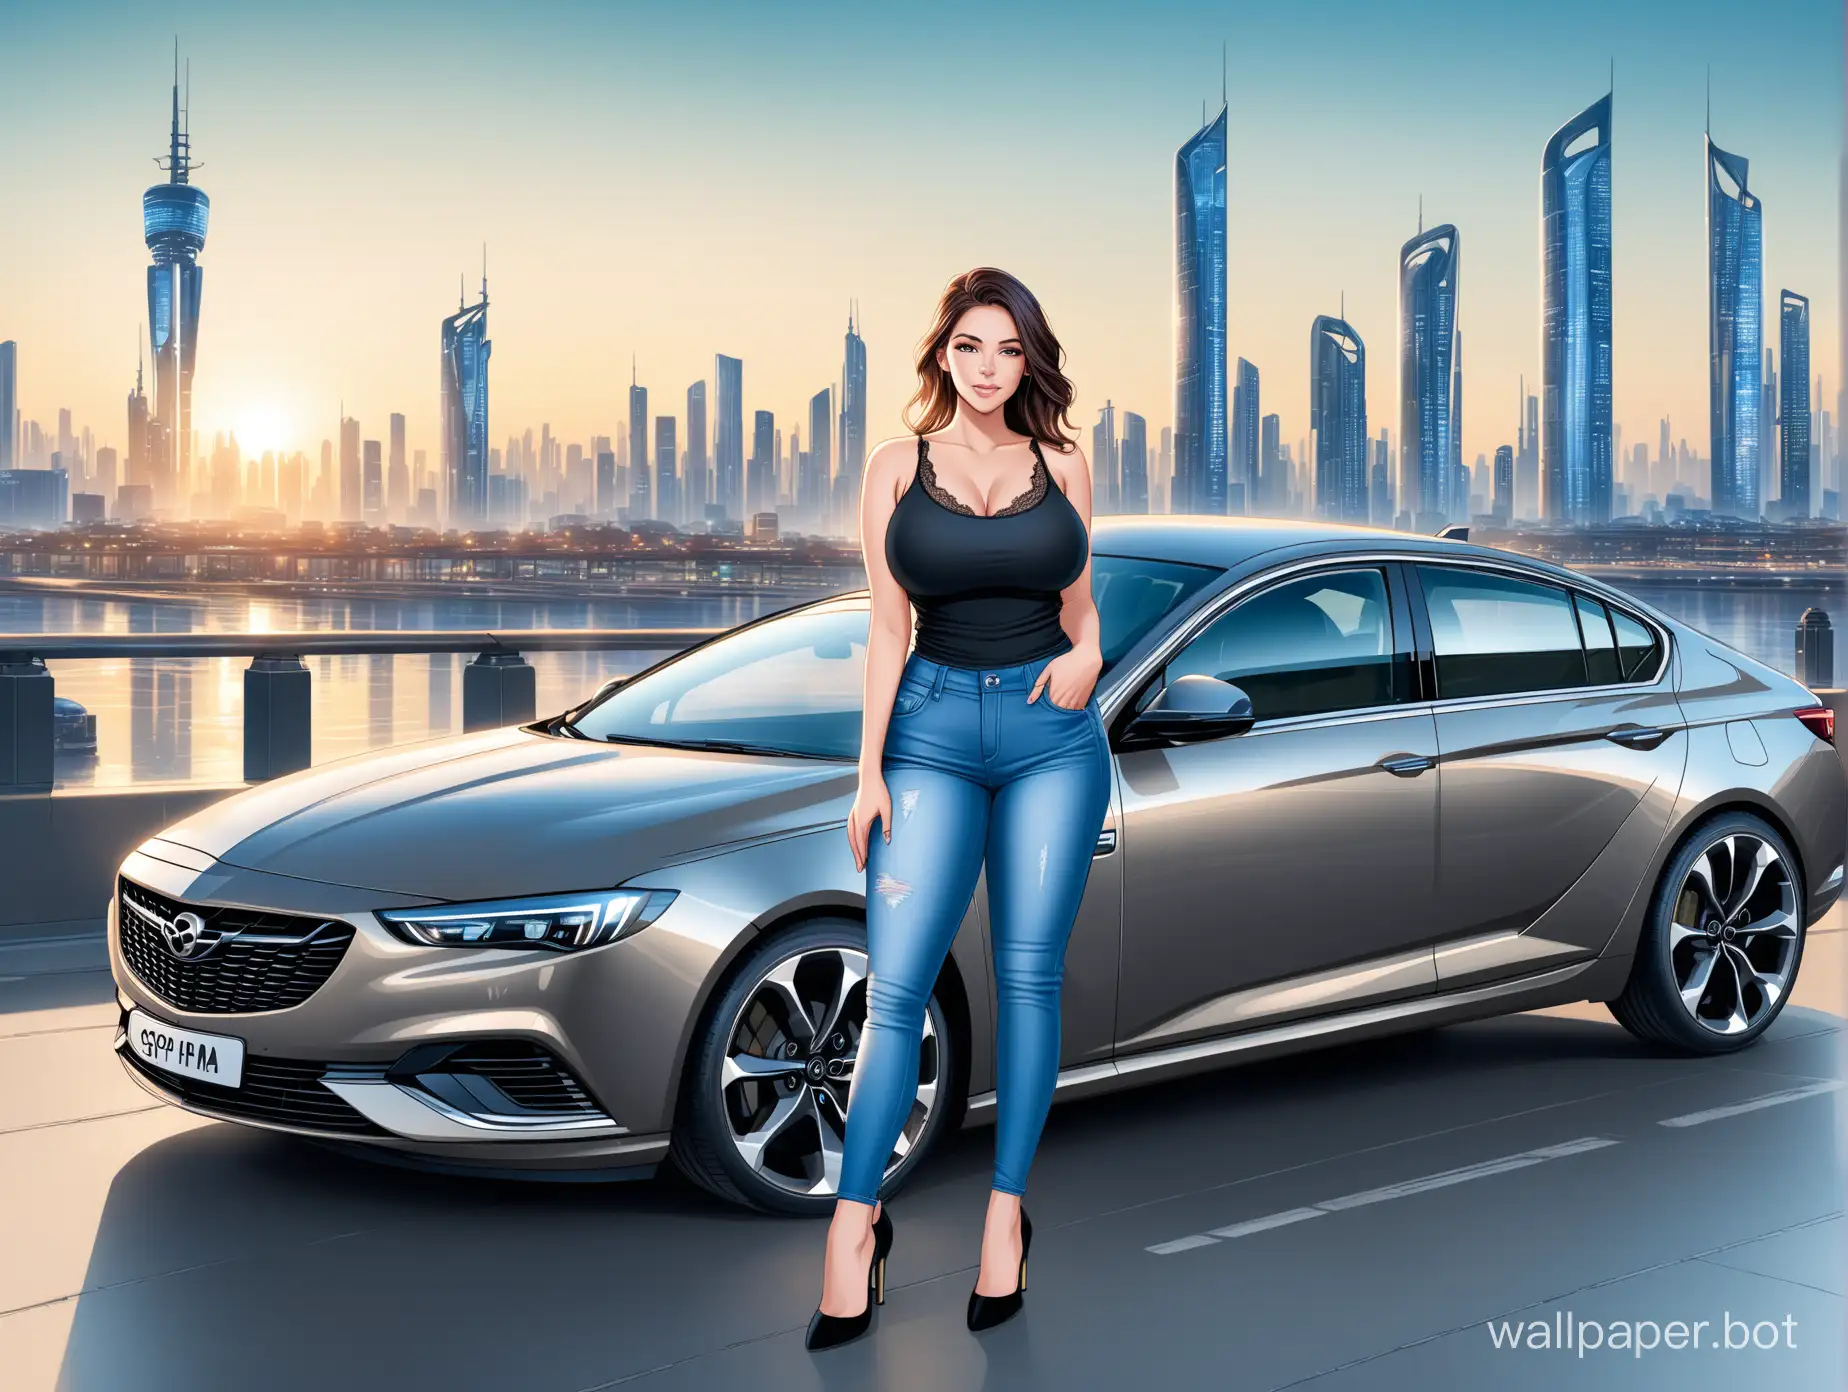 curvy brunette in jeans and black tank top with lace,high heels standing next to a Opel Insignia Grand Sport in steel color with a futuristic city in the background